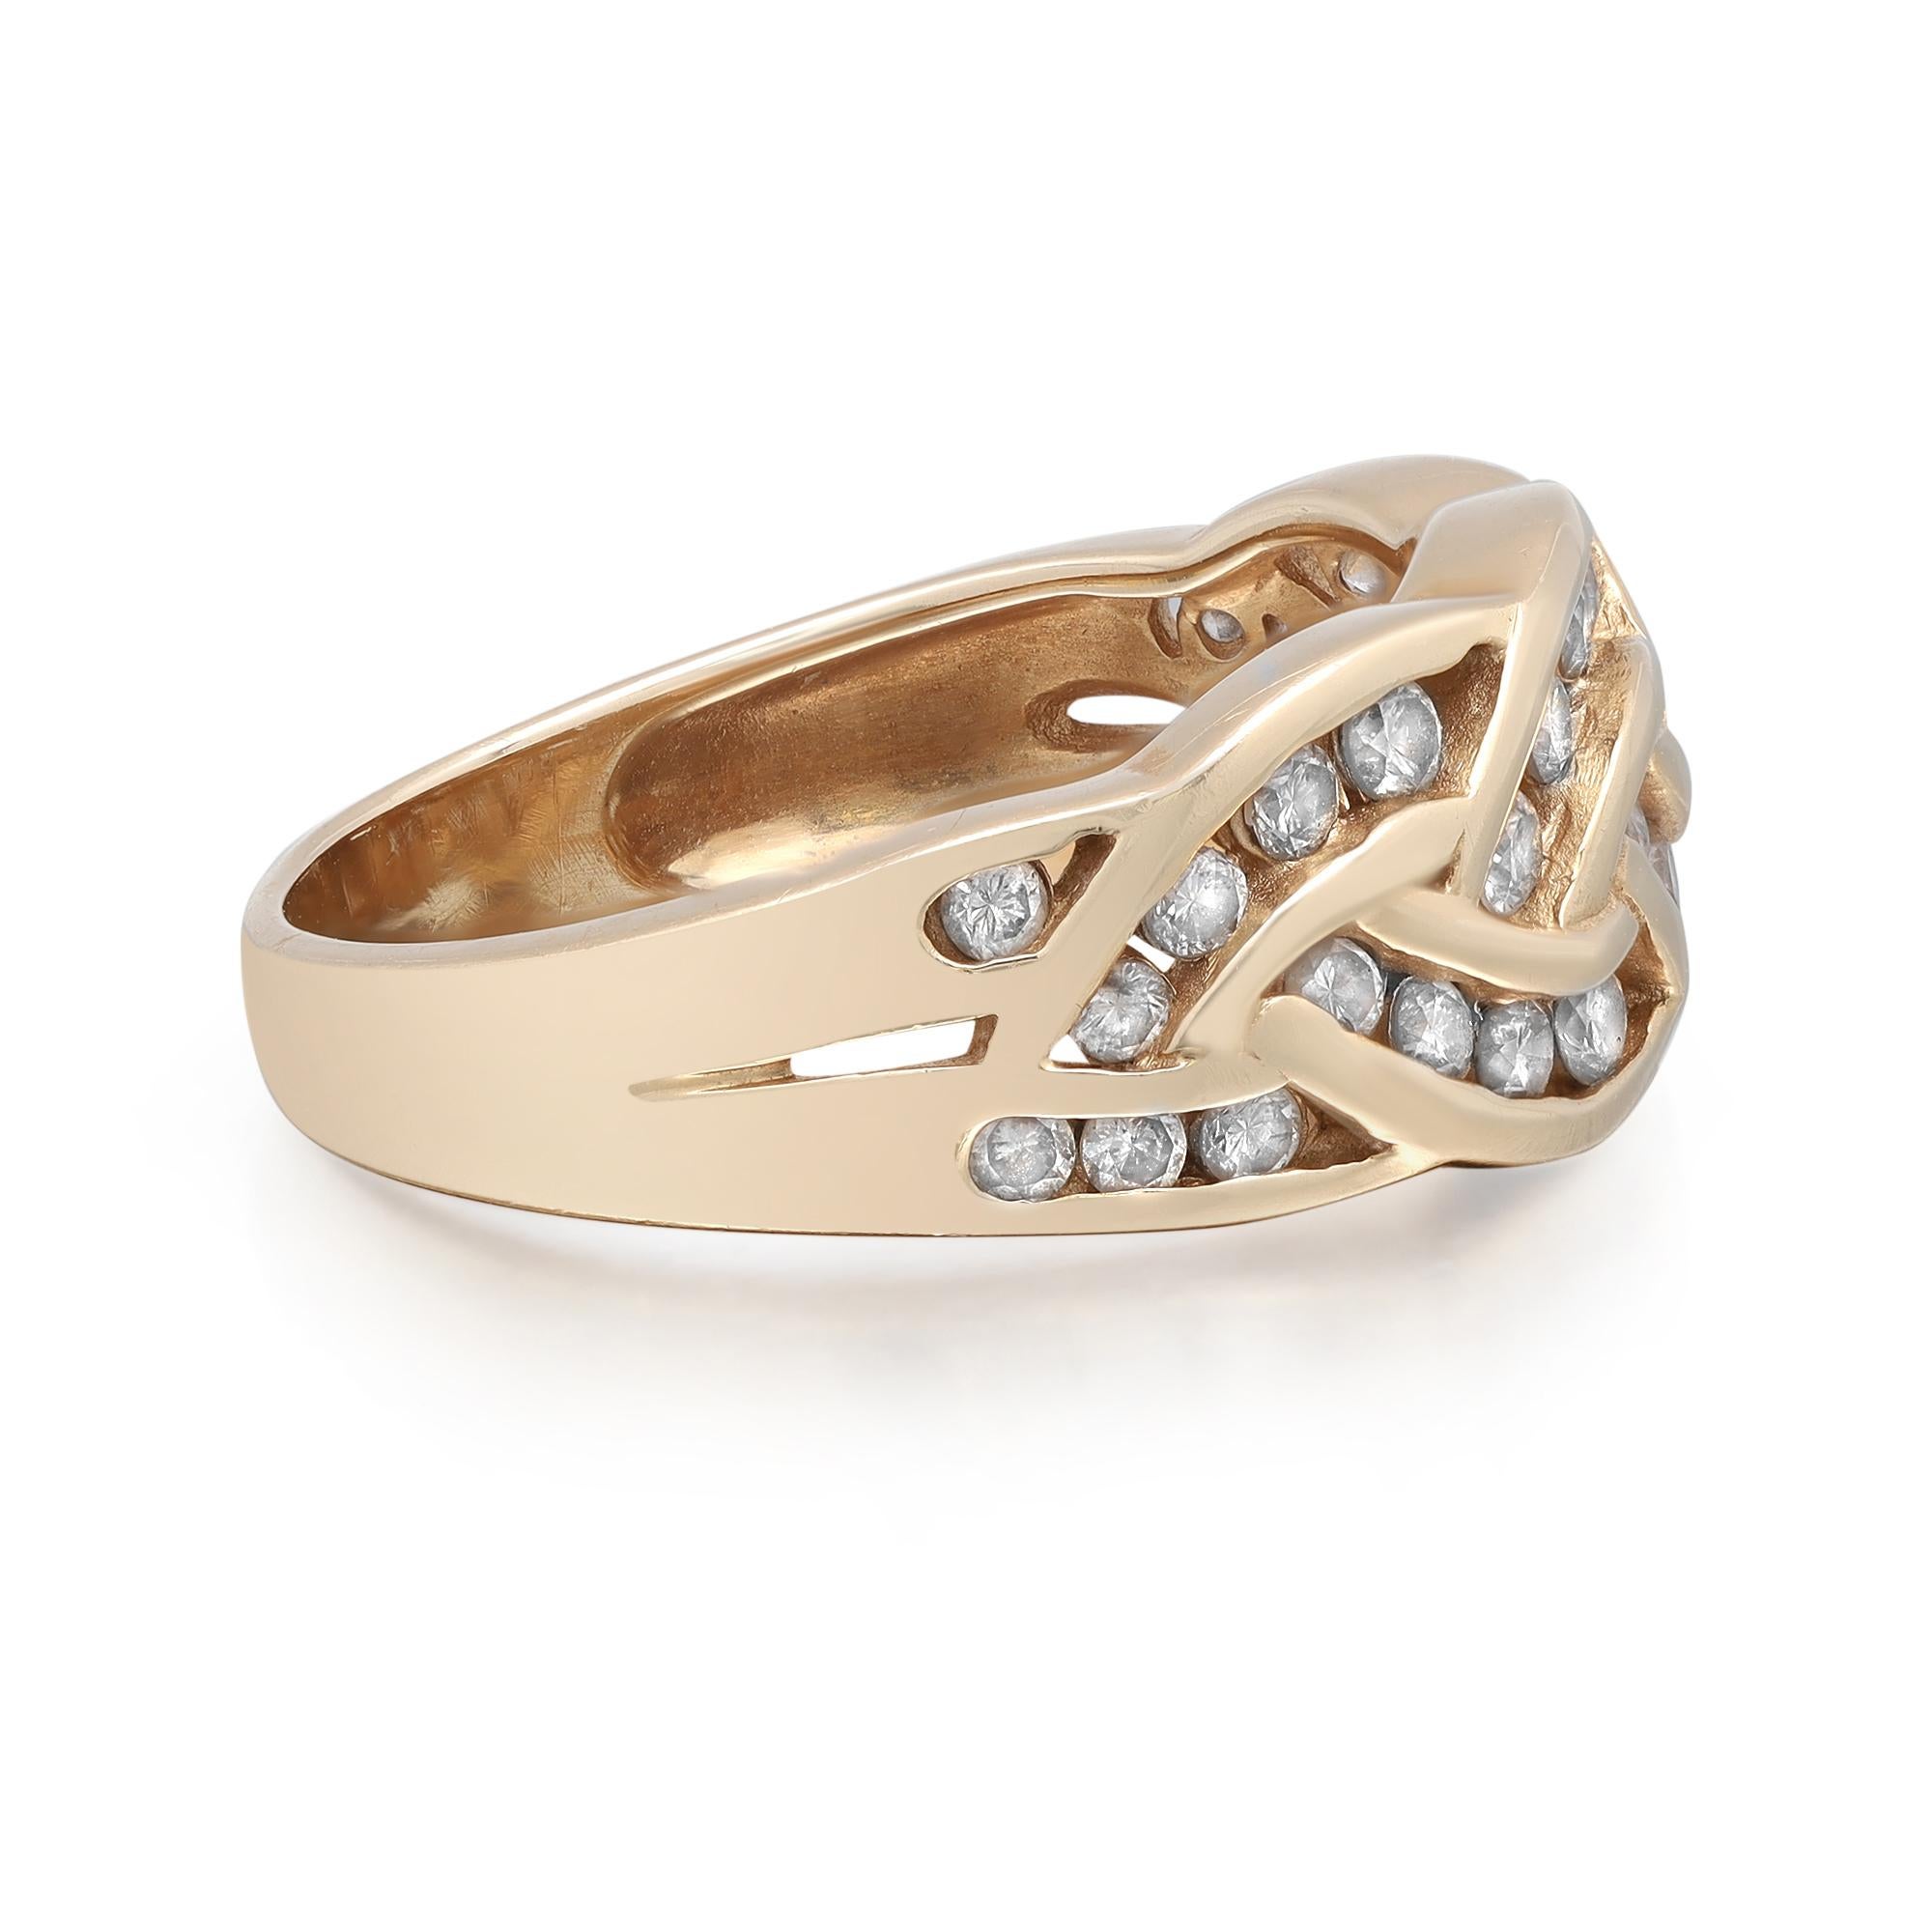 This gorgeous diamond band ring is crafted in 14k yellow gold with dazzling round cut diamonds in channel setting giving the ring a very unique feminine style. Total diamond weight: 1.05 carats. The ring is size 7.25. Total weight: 4.96 grams. Great